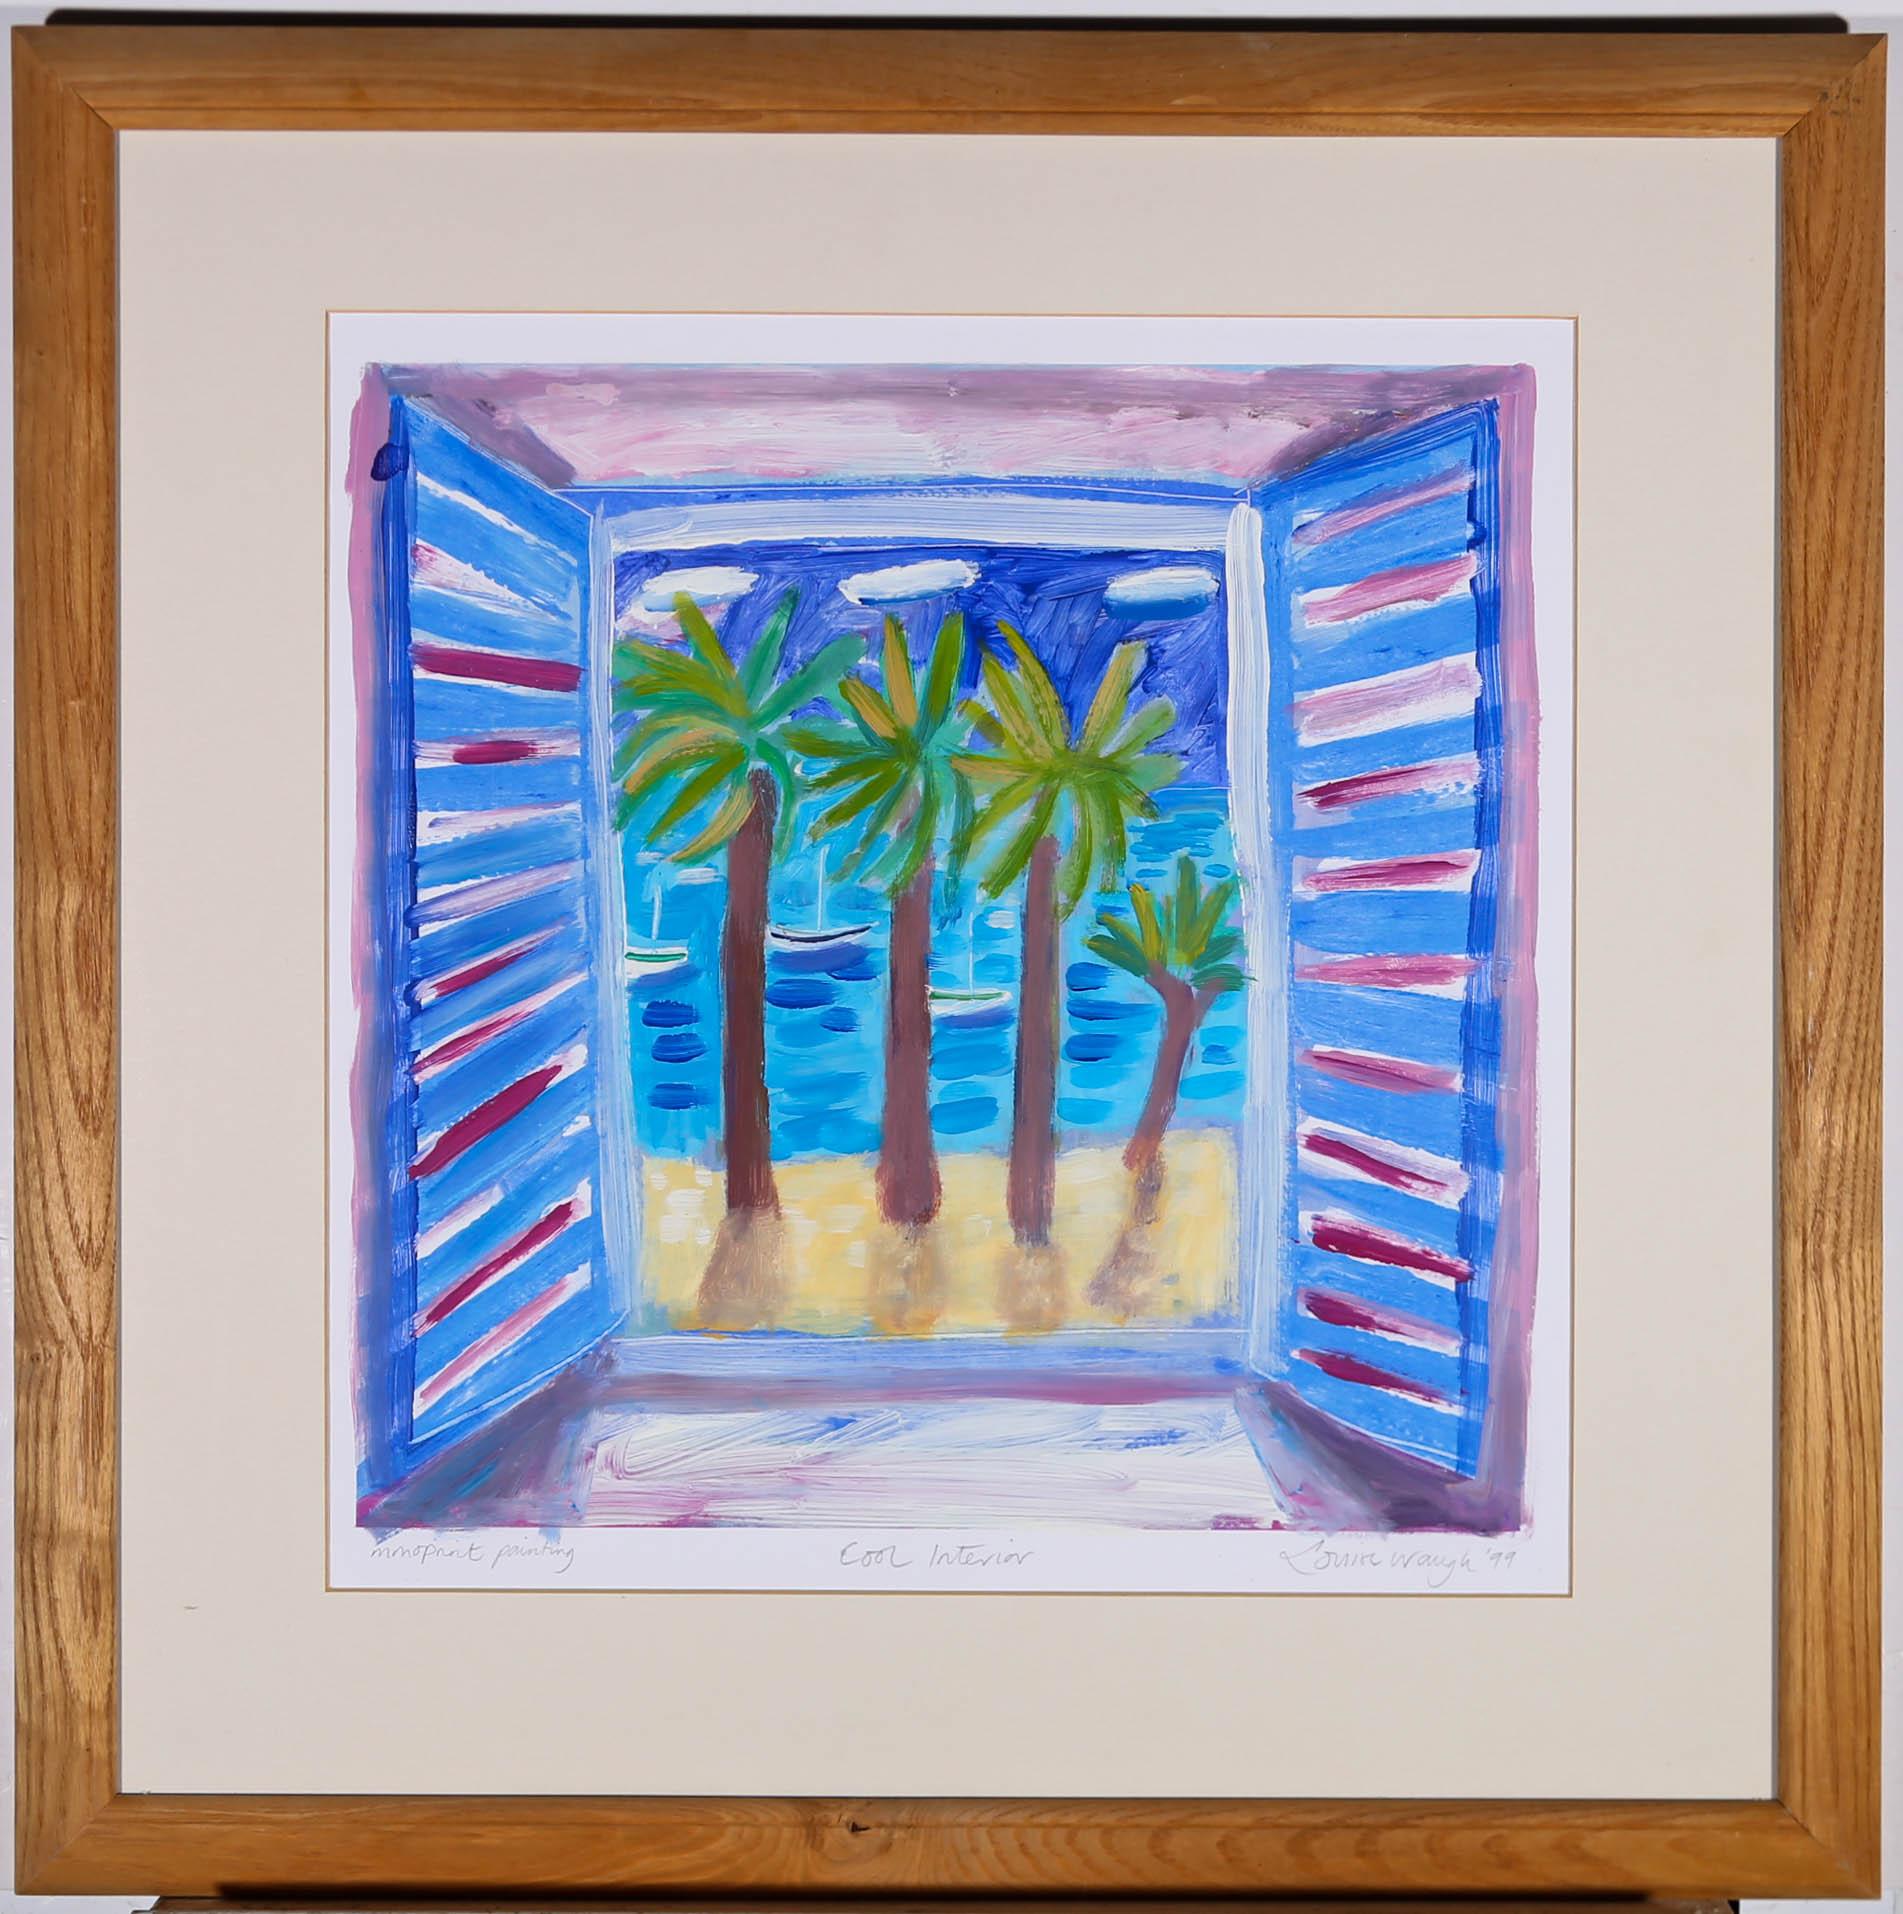 A fun and eye catching artwork, this interior scene is a monoprint base with bright, gestural gouache on top. The artist has signed, dated and inscribed to the lower edge and the artwork has been presented in a wood frame with card mount. On